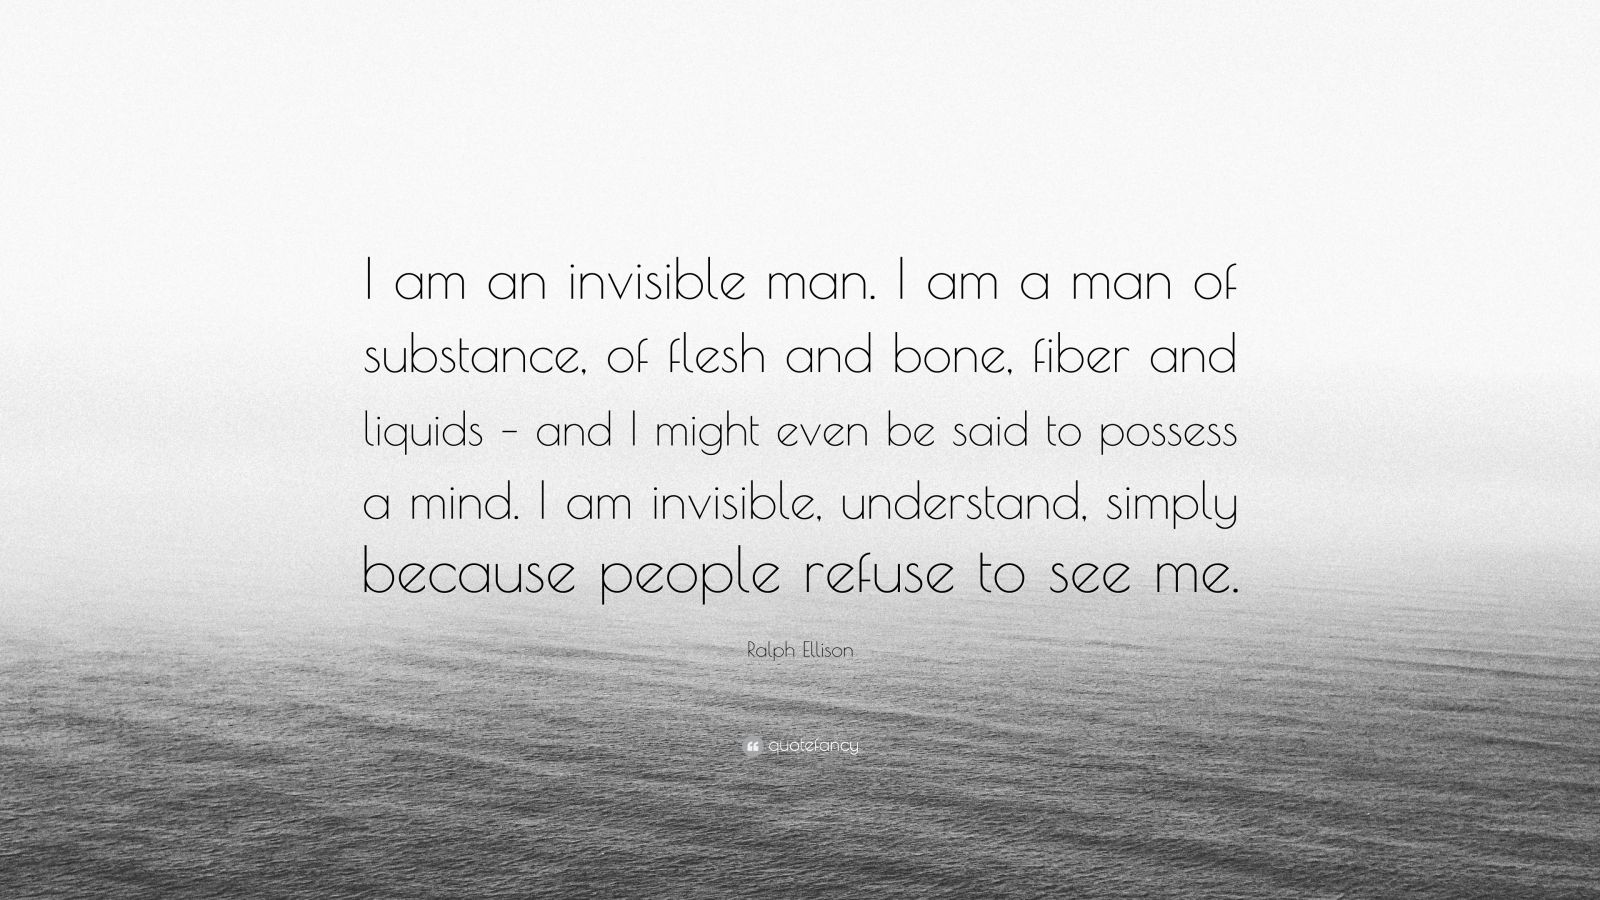 Ralph Ellison Quote: "I am an invisible man. I am a man of substance, of flesh and bone, fiber ...